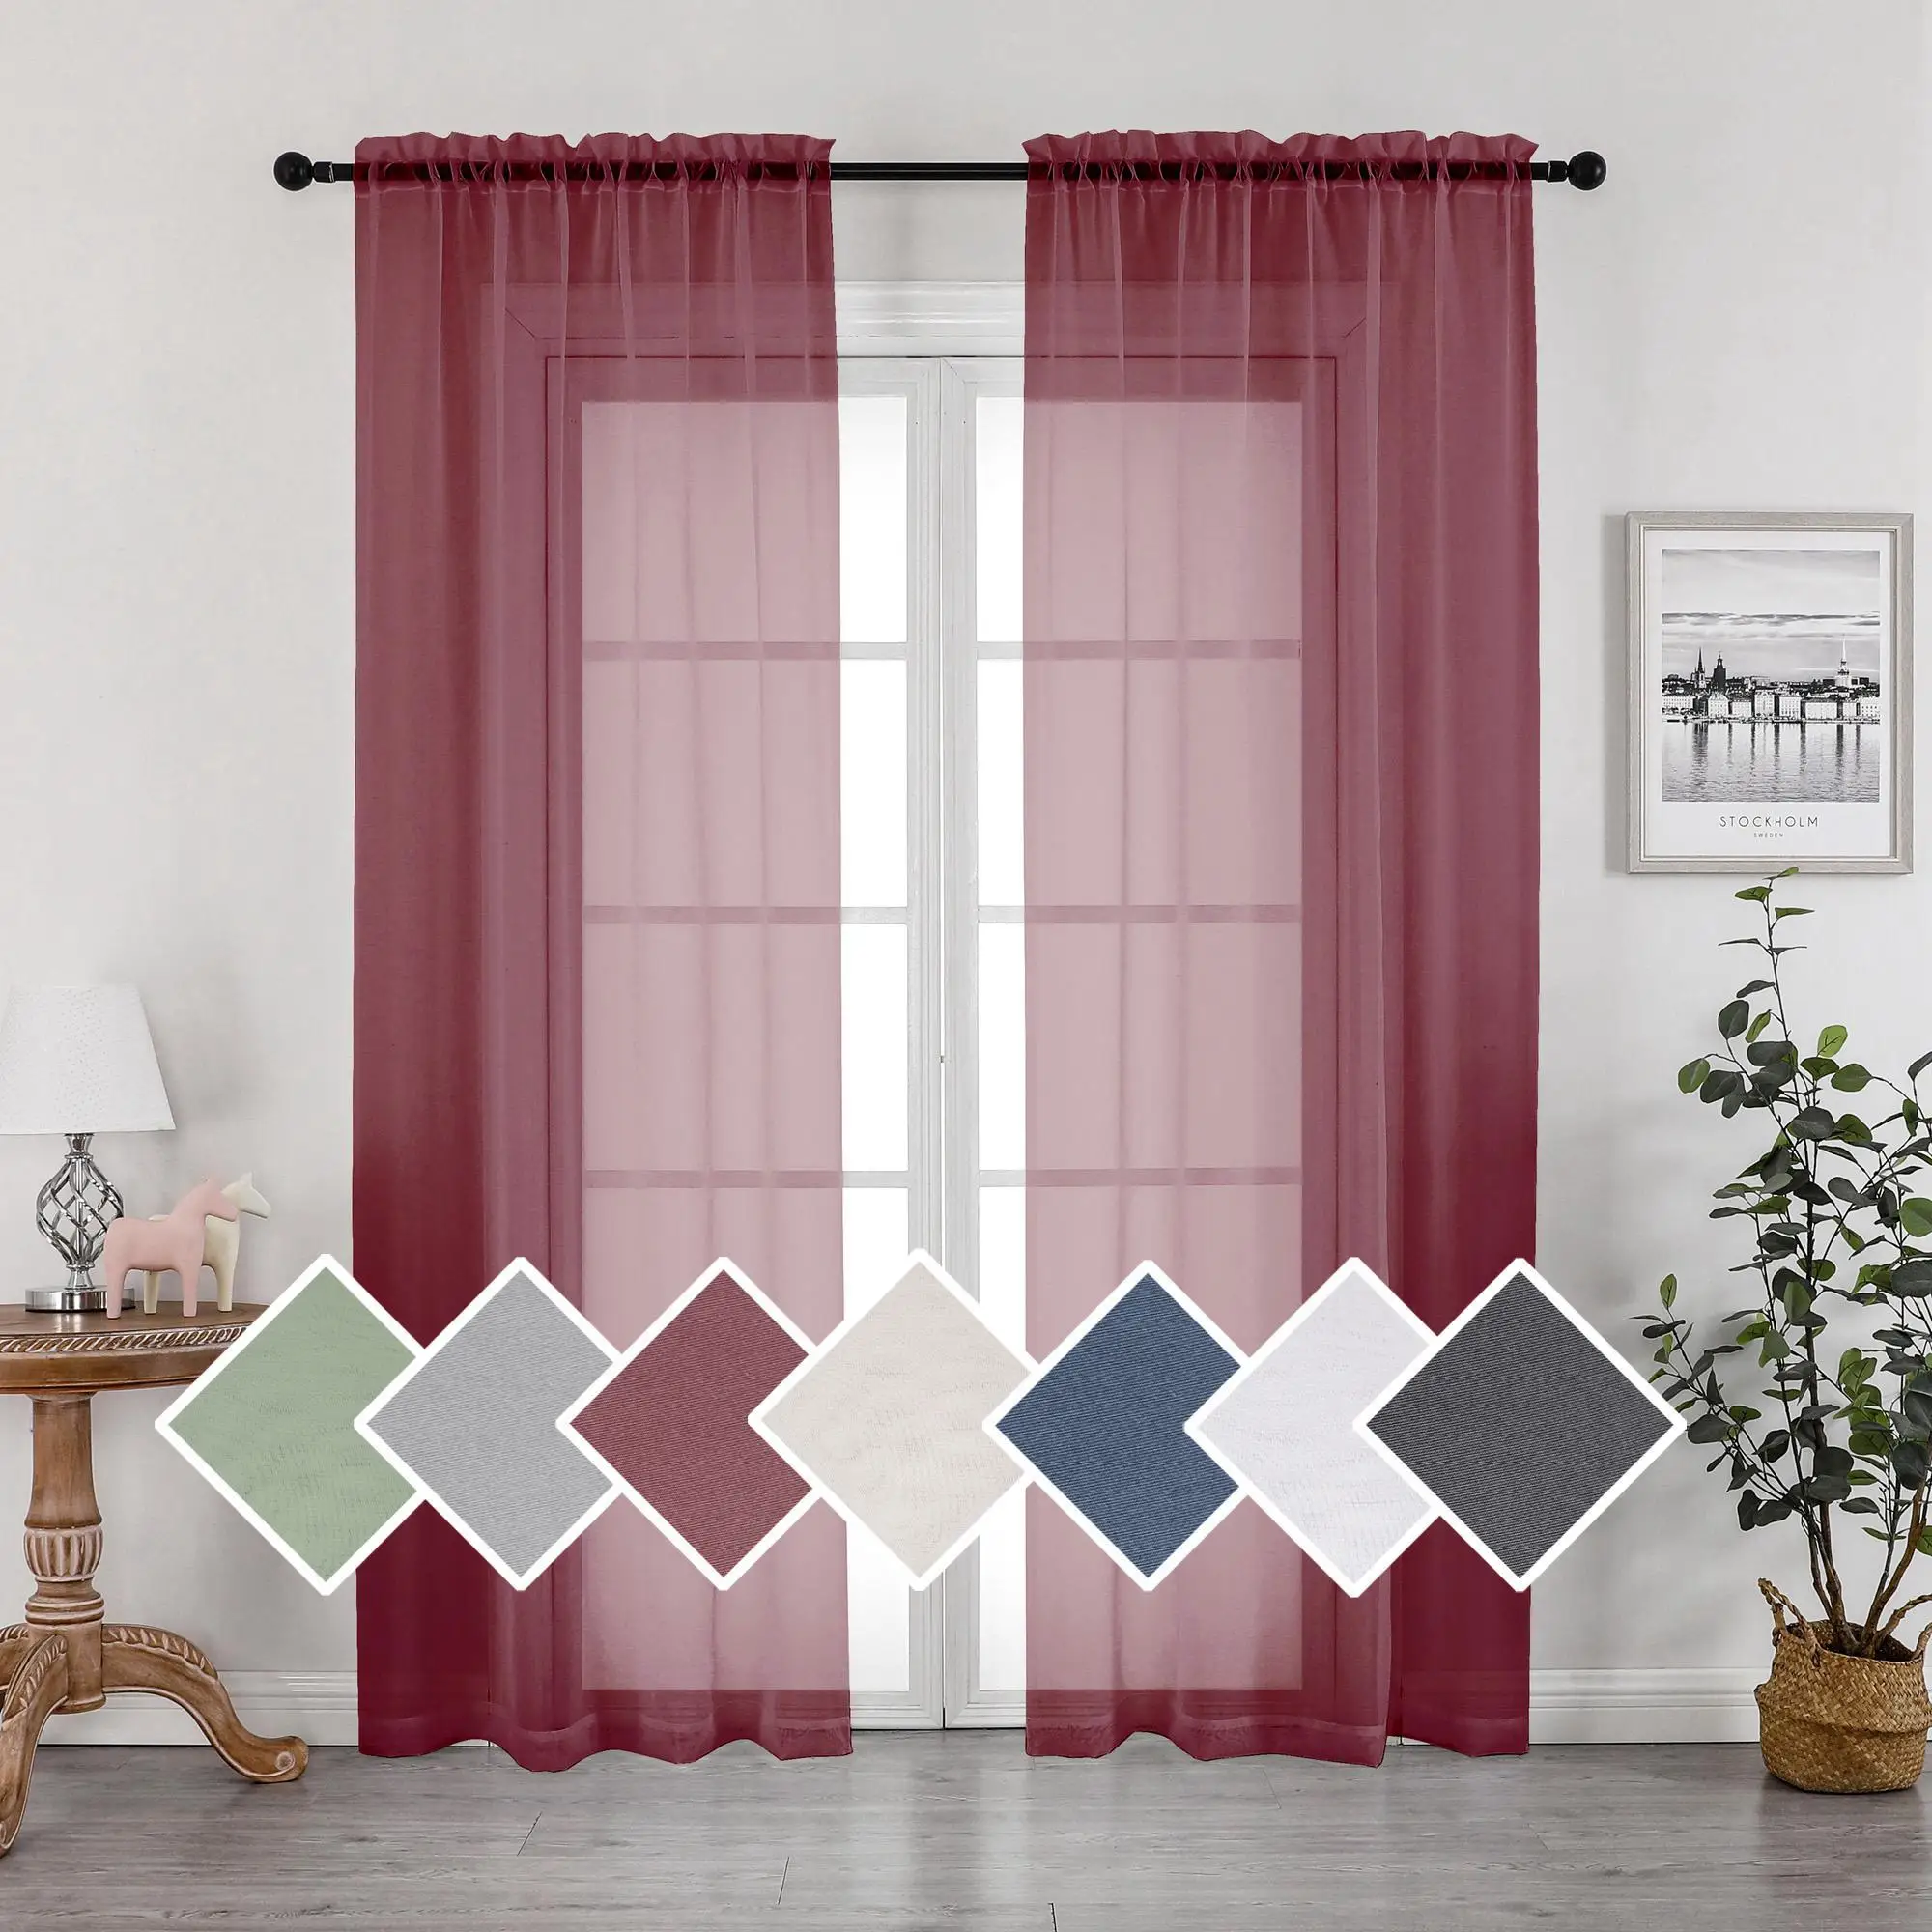 

Elegant Hot Selling Red Curtain Light OWENIE Burgundy Red Ready Made Sheer Voile Window Curtain Bedroom